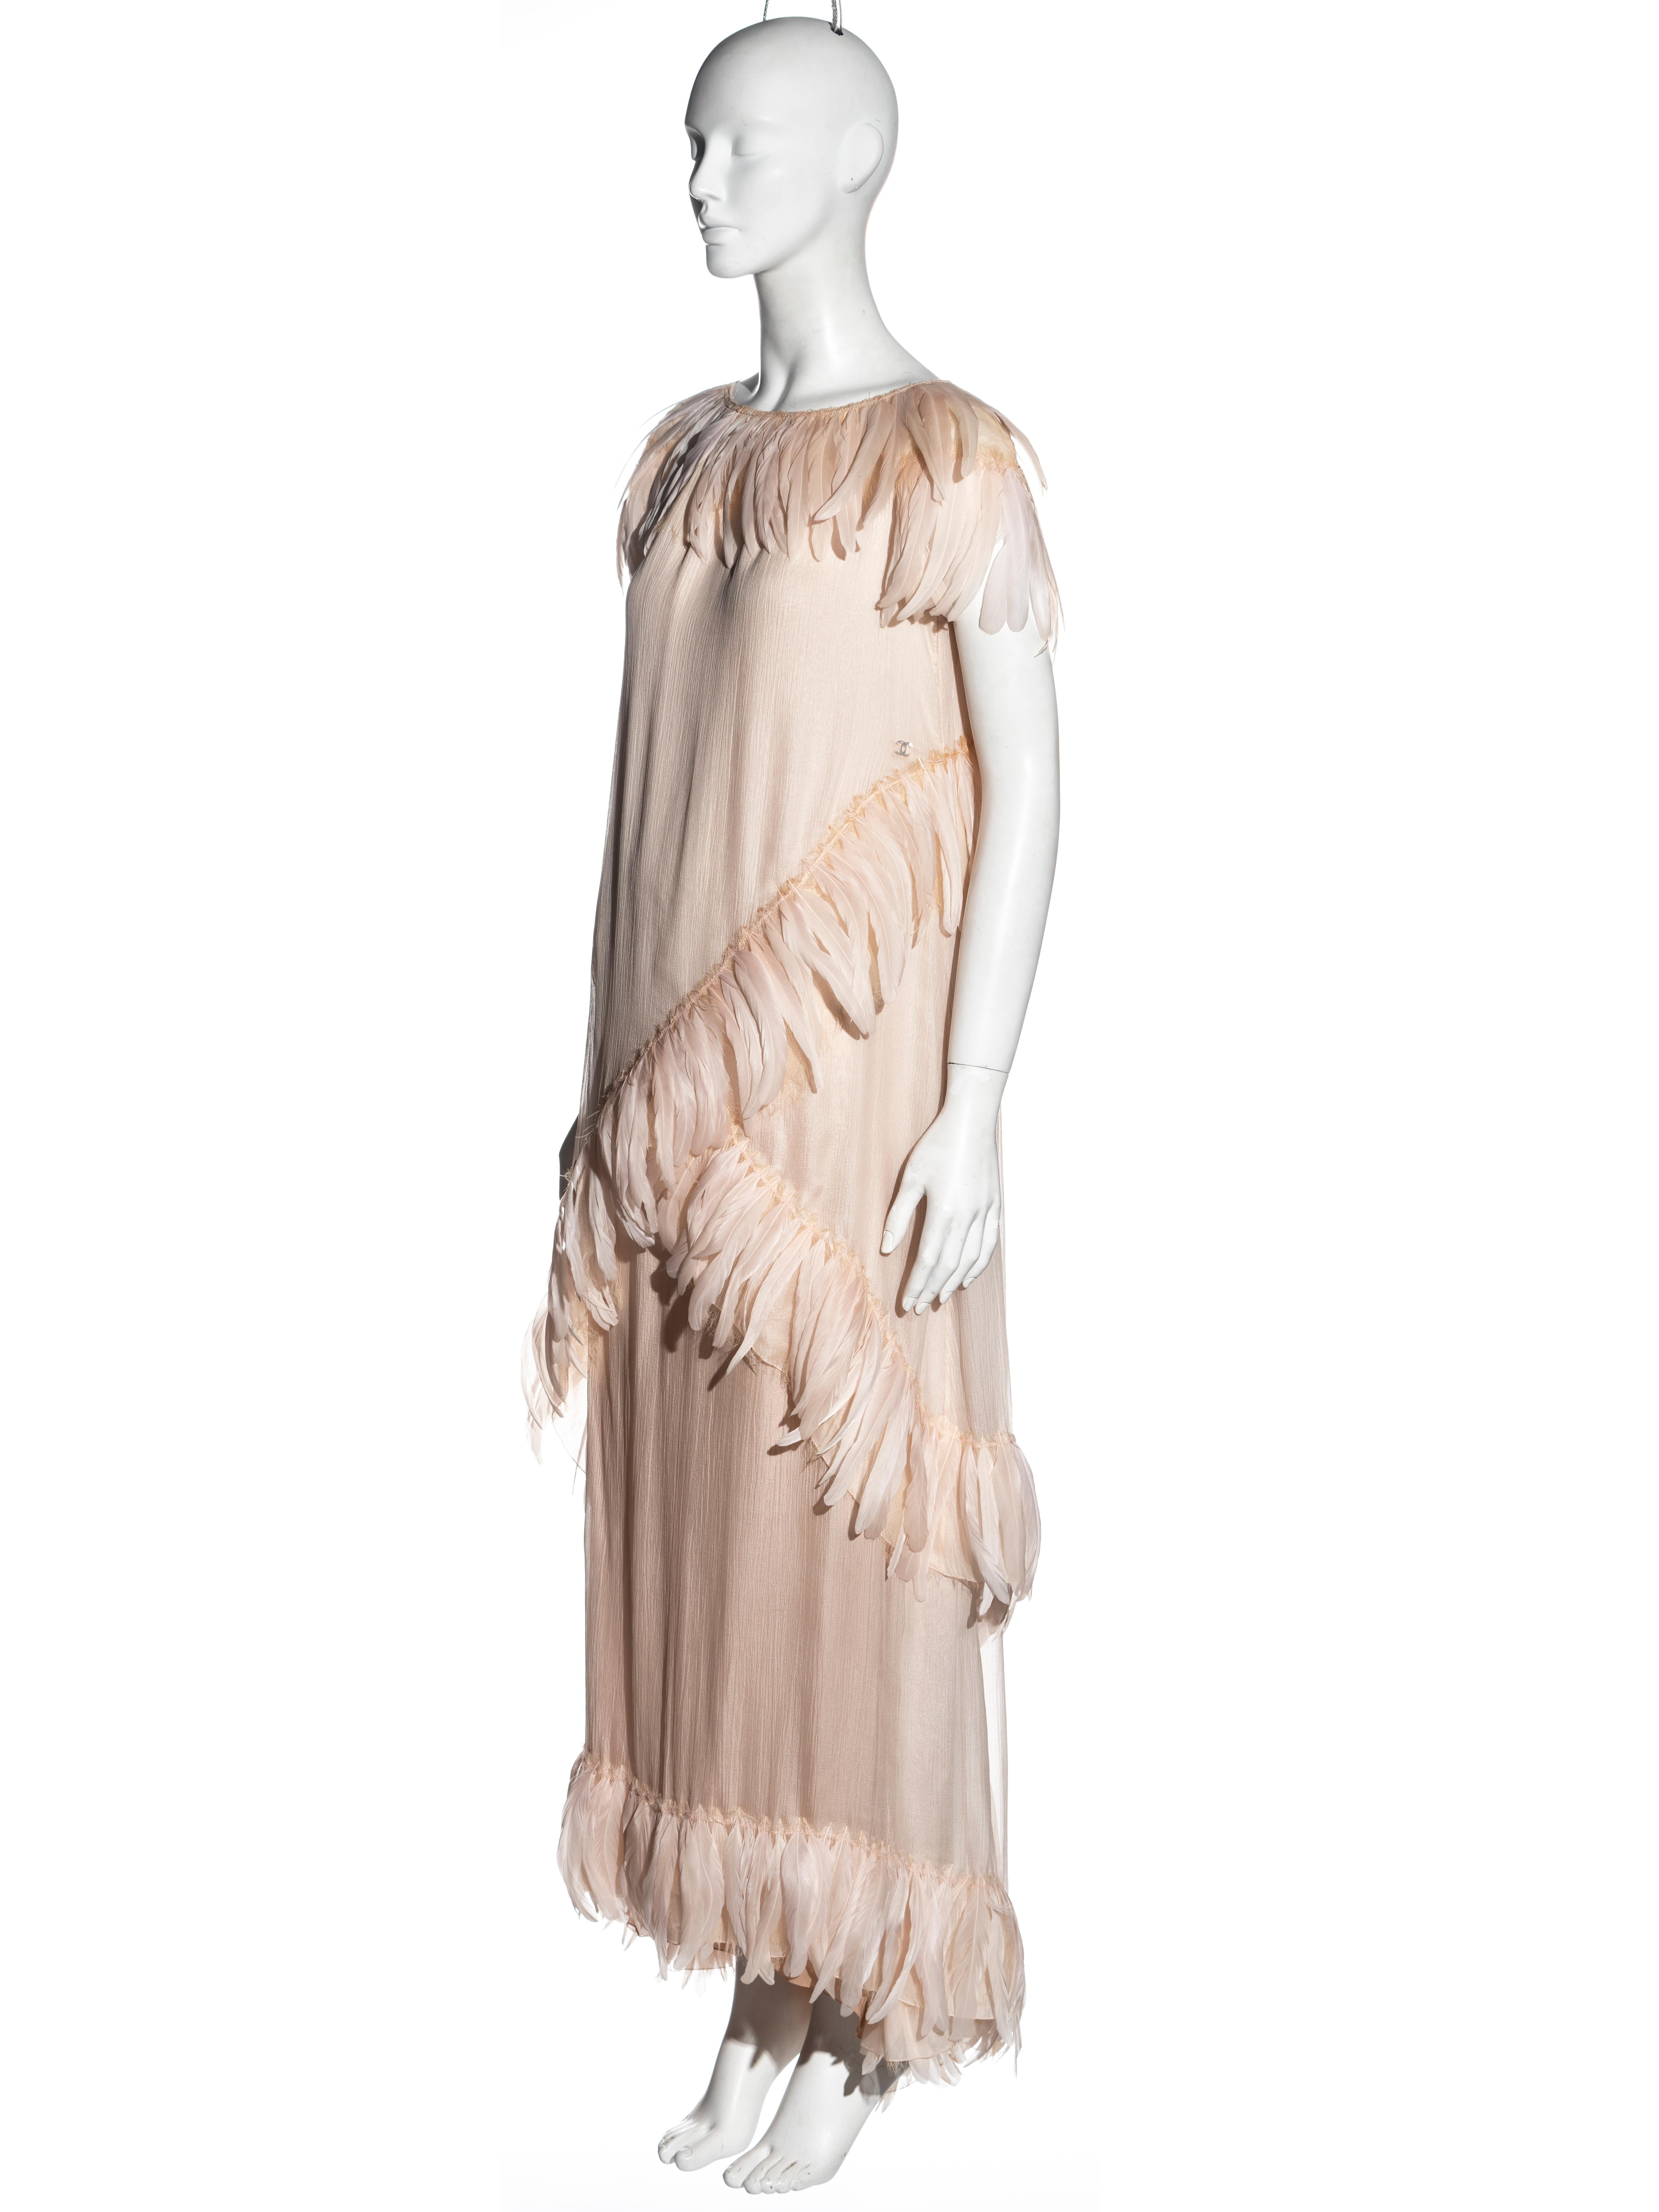 Chanel by Karl Lagerfeld silk chiffon evening dress with feathers, cr 2009 2